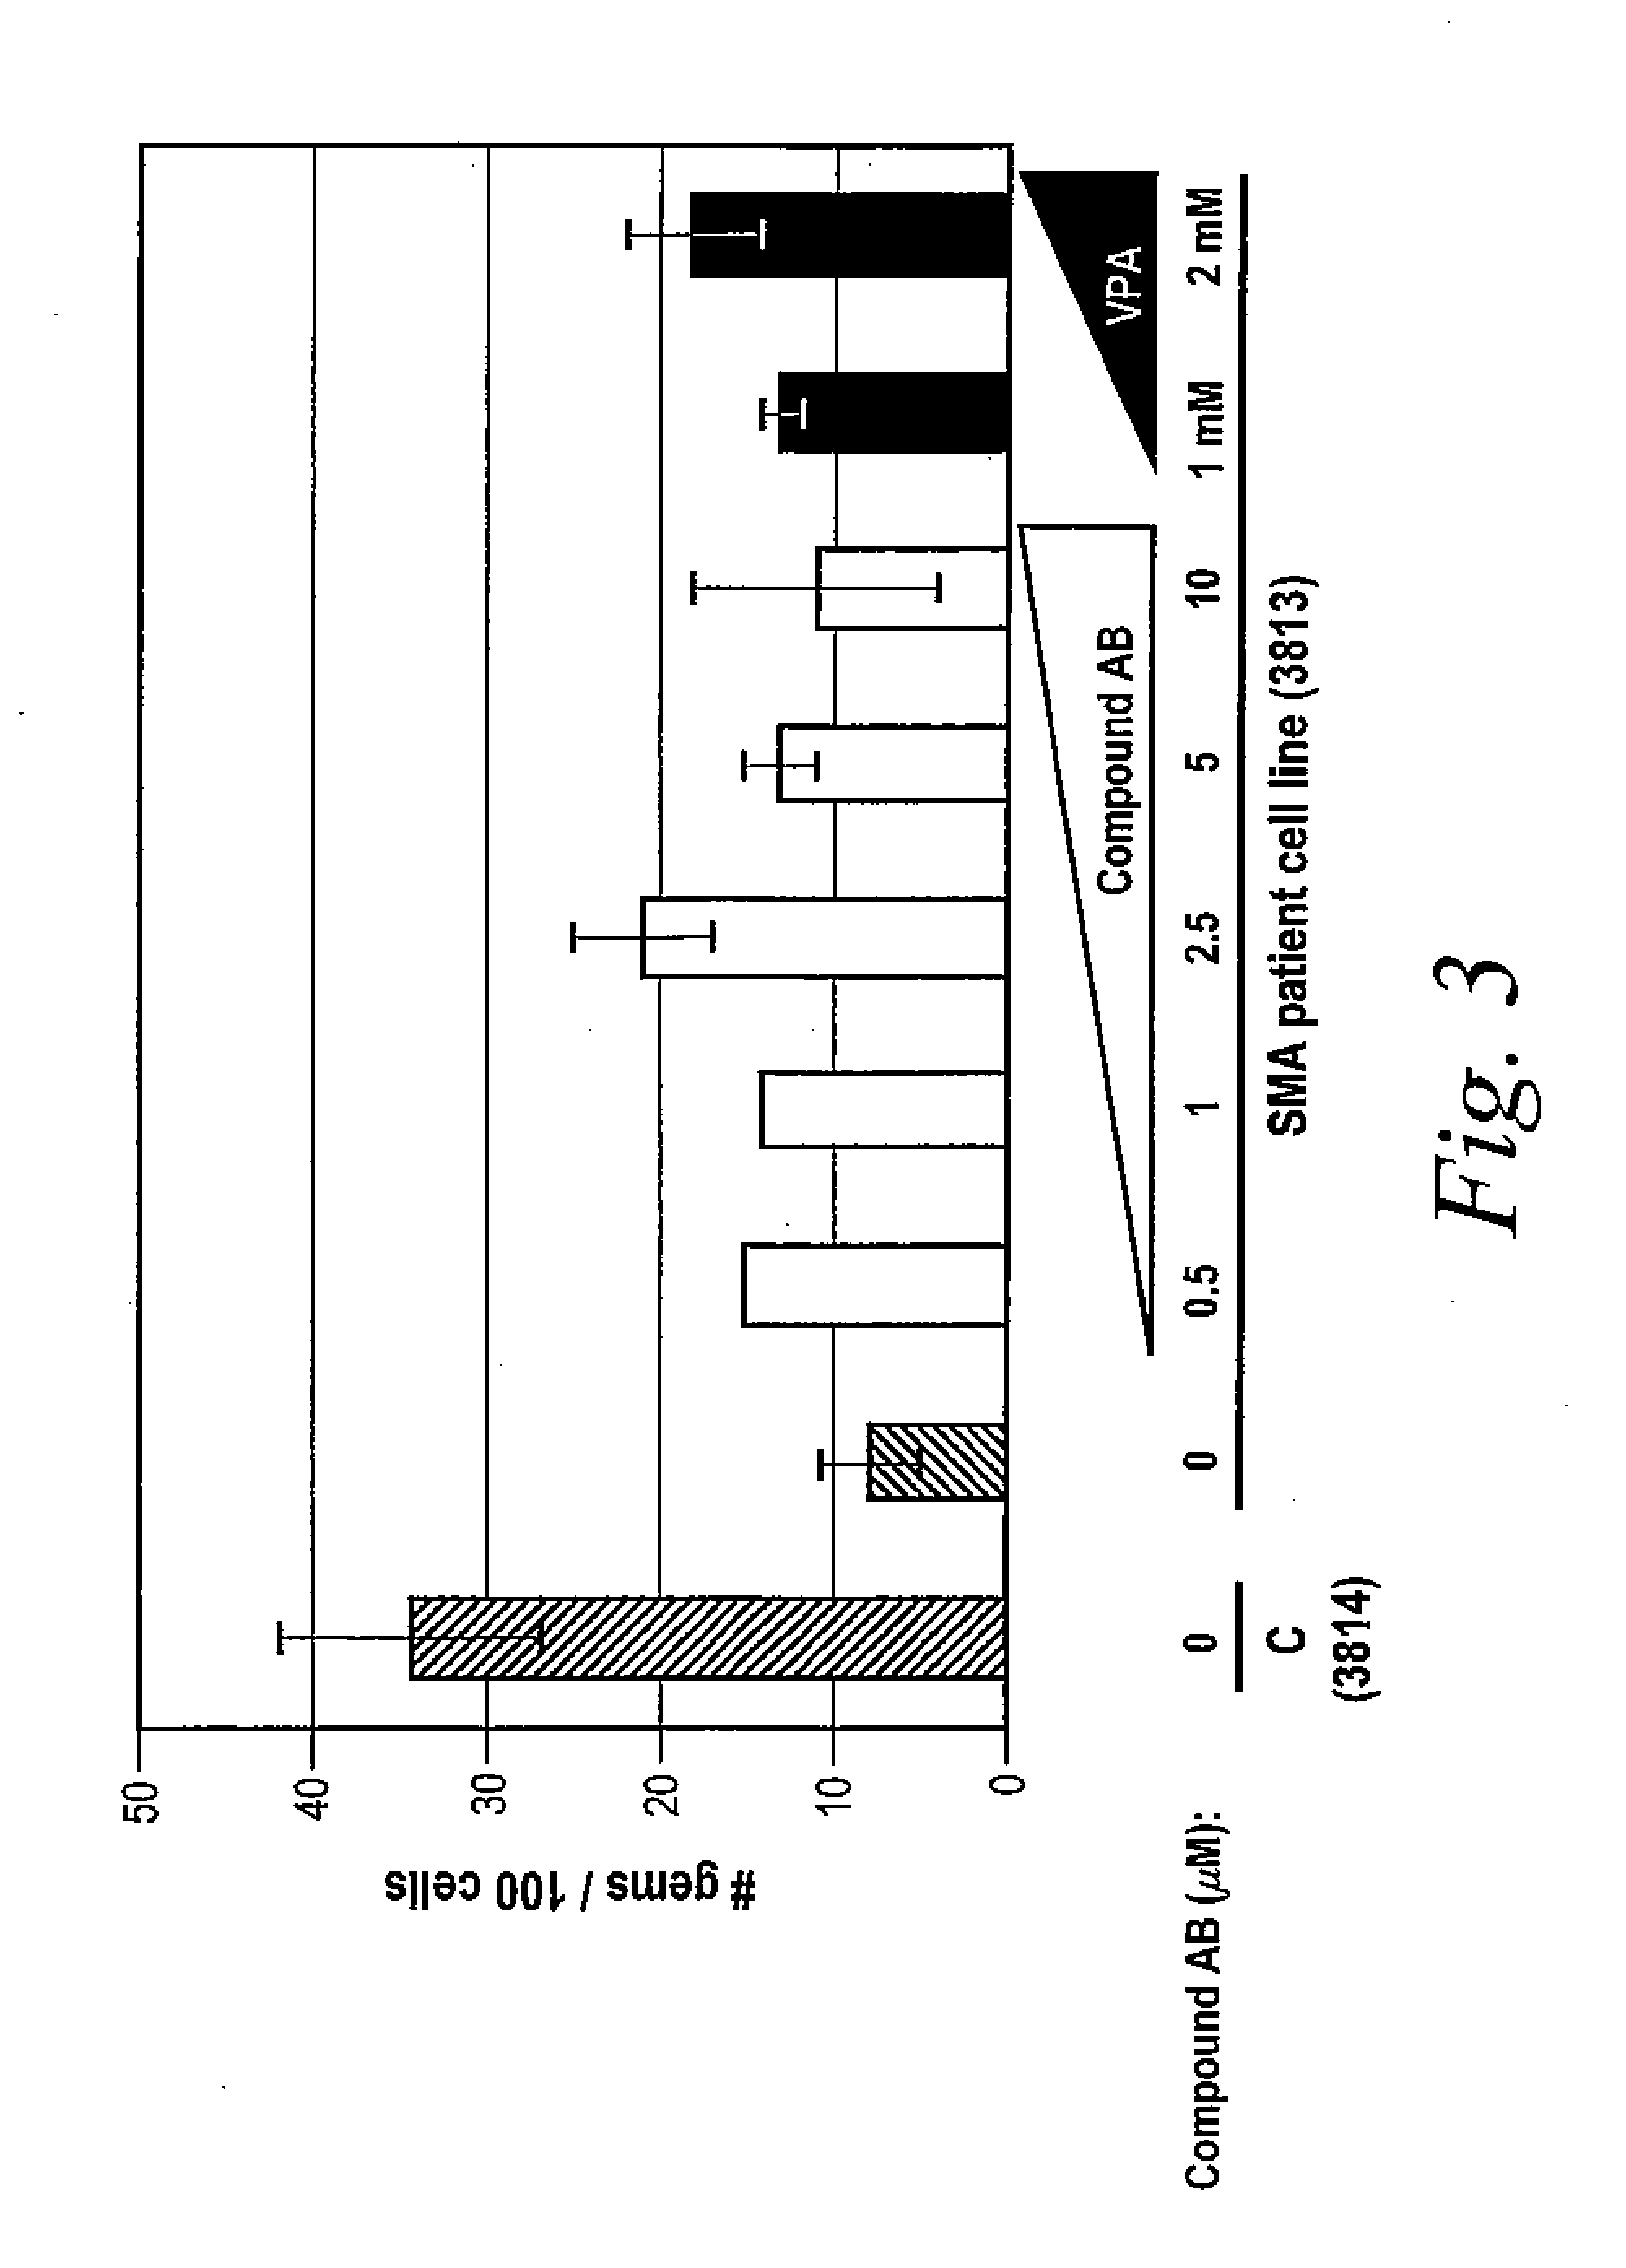 Methods for Treating Spinal Muscular Atrophy Using Tetracycline Compounds